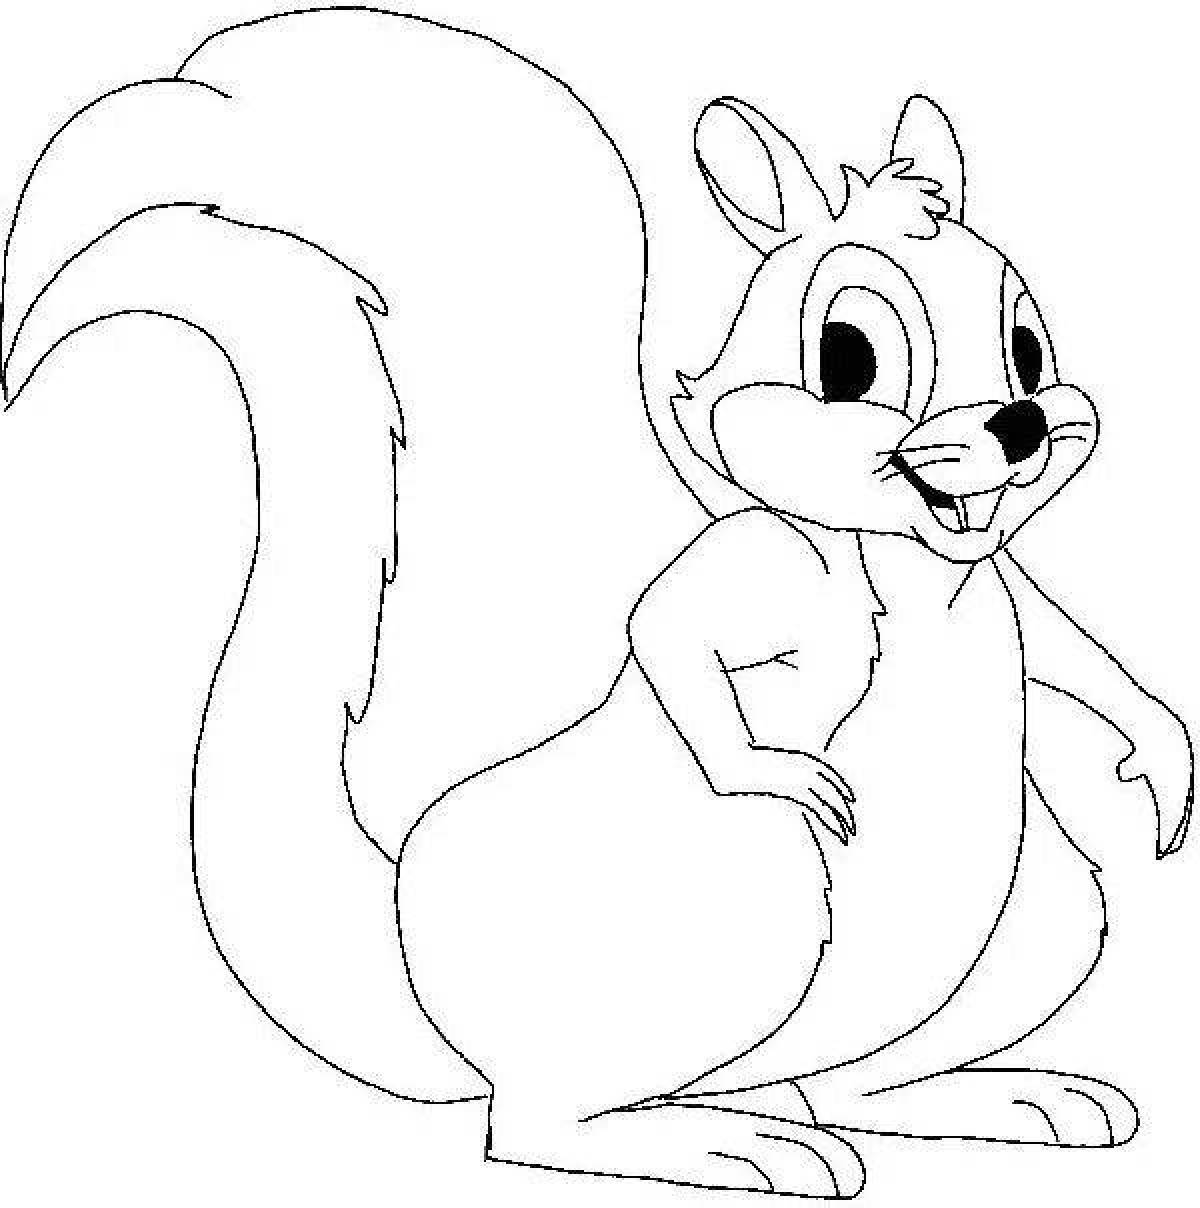 Colorful squirrel coloring page